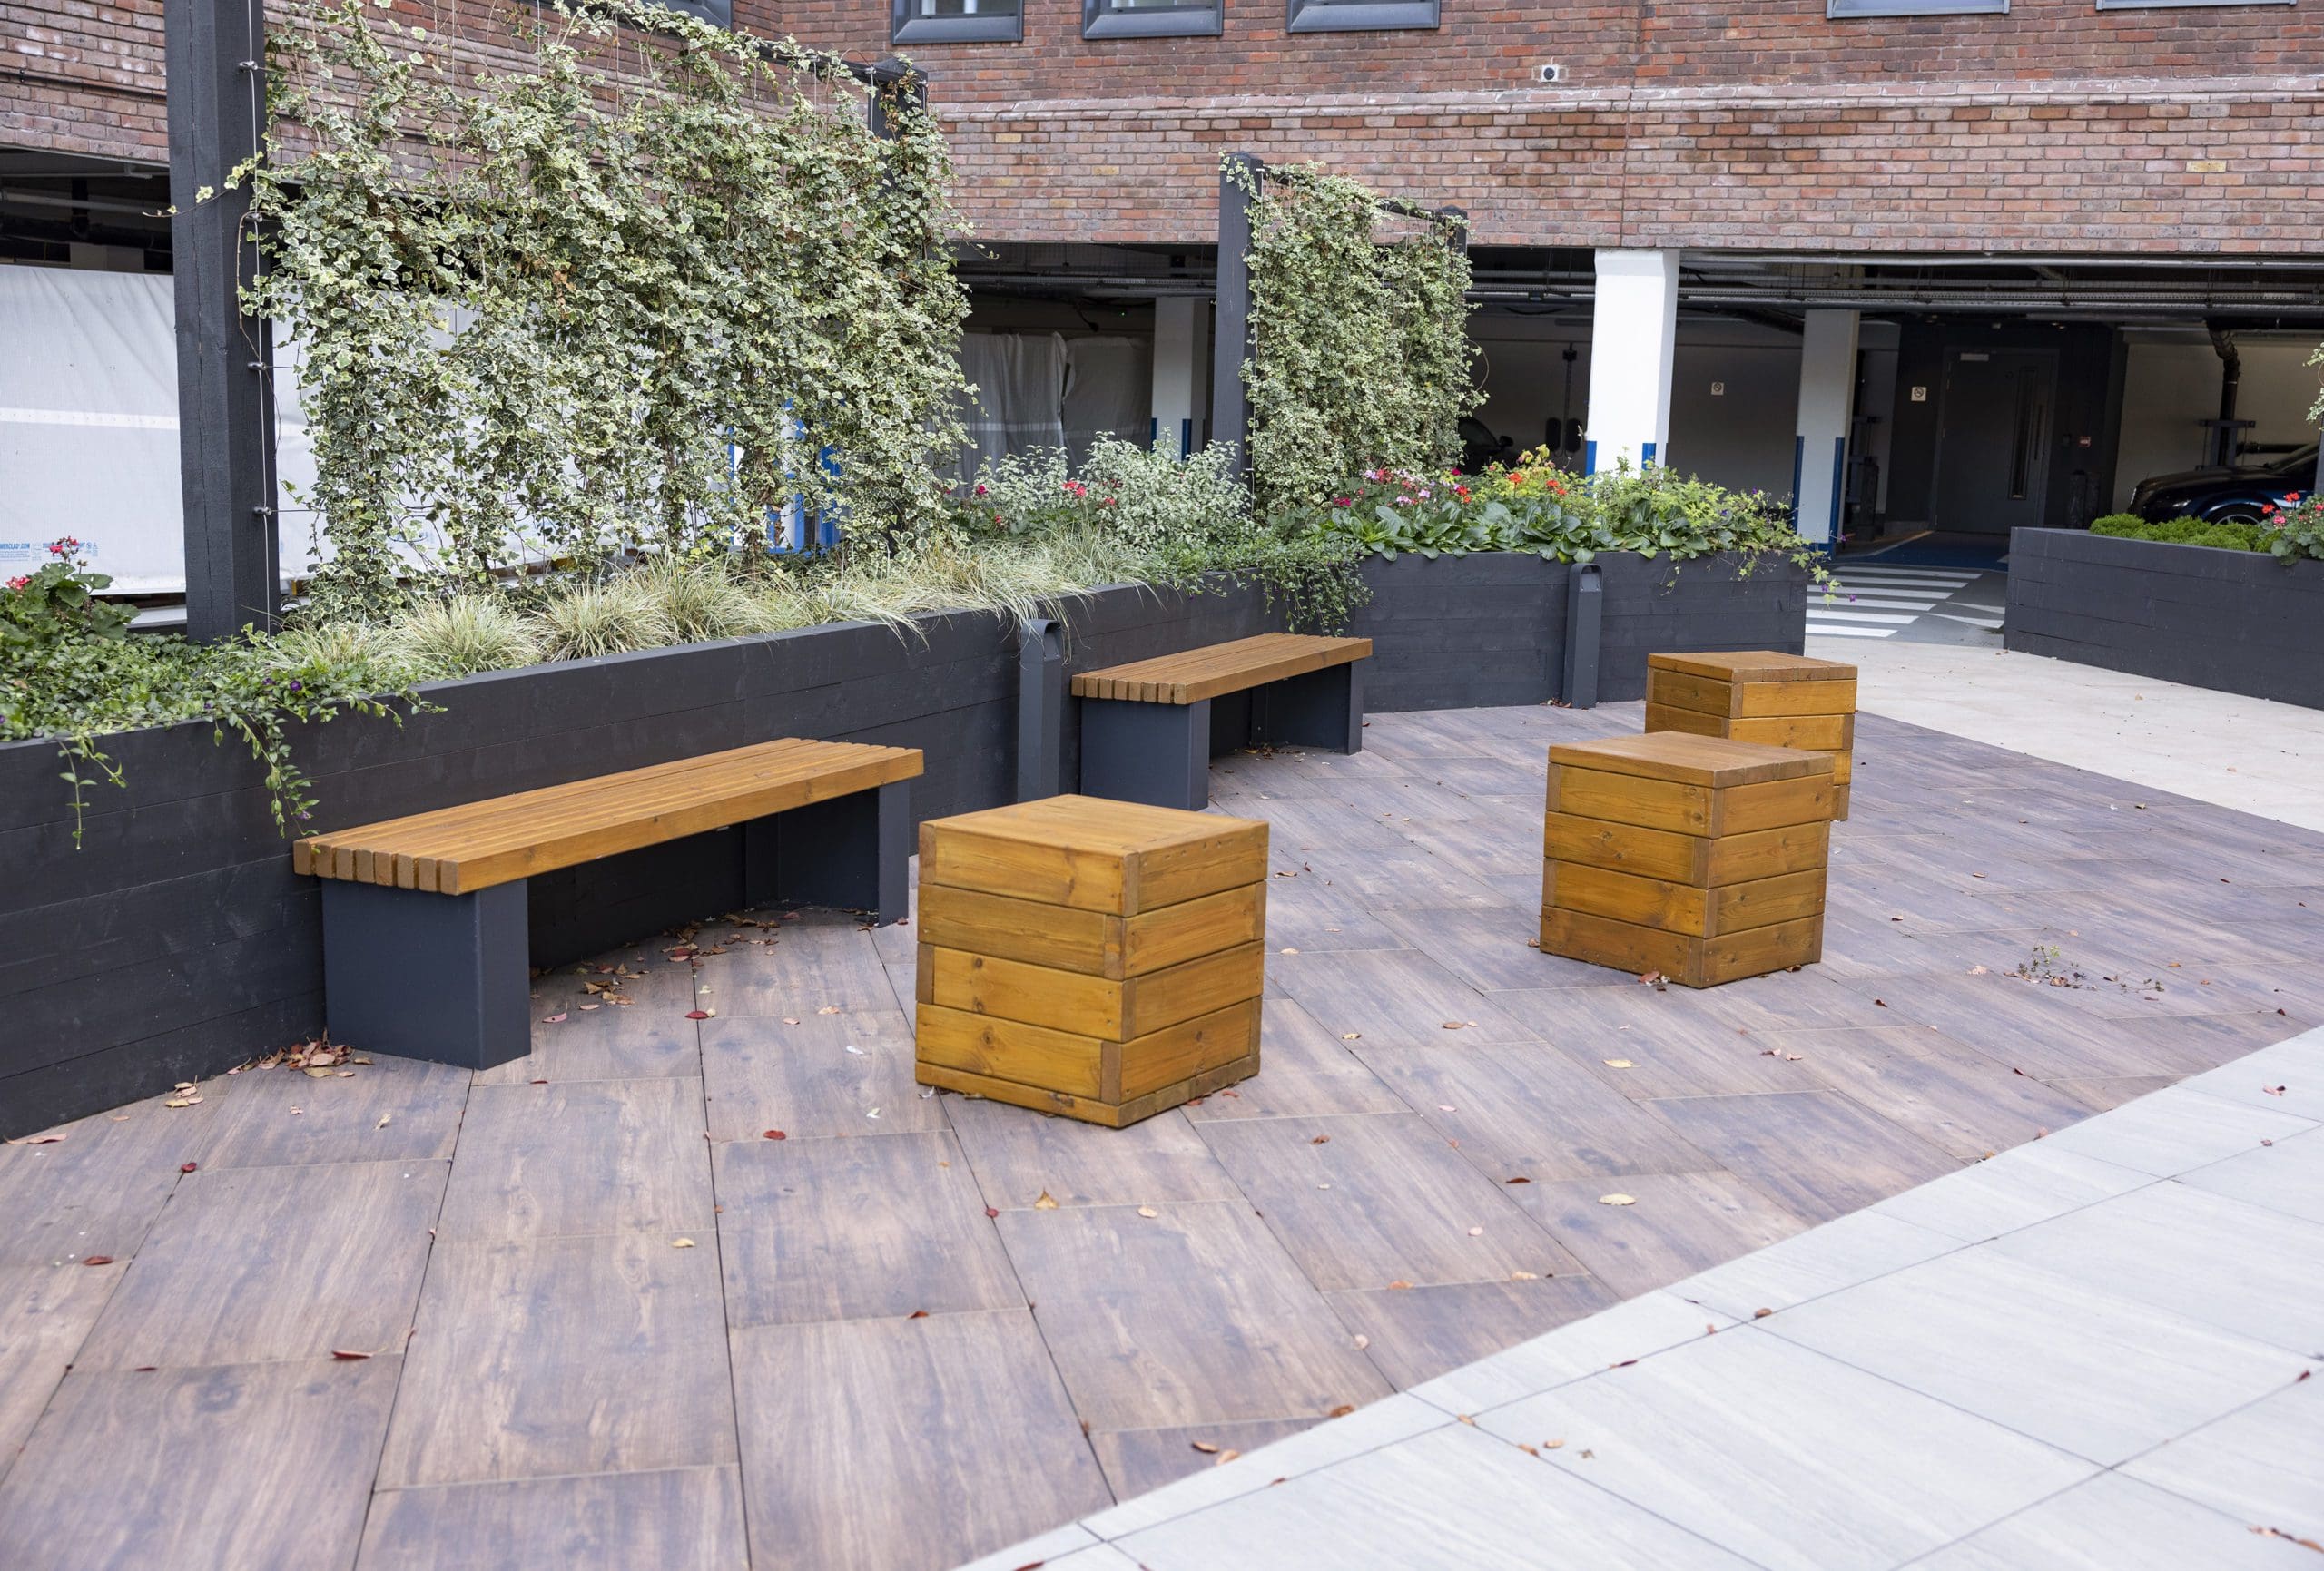 wooden square block individual seats and benches with black metal legs infront of plants